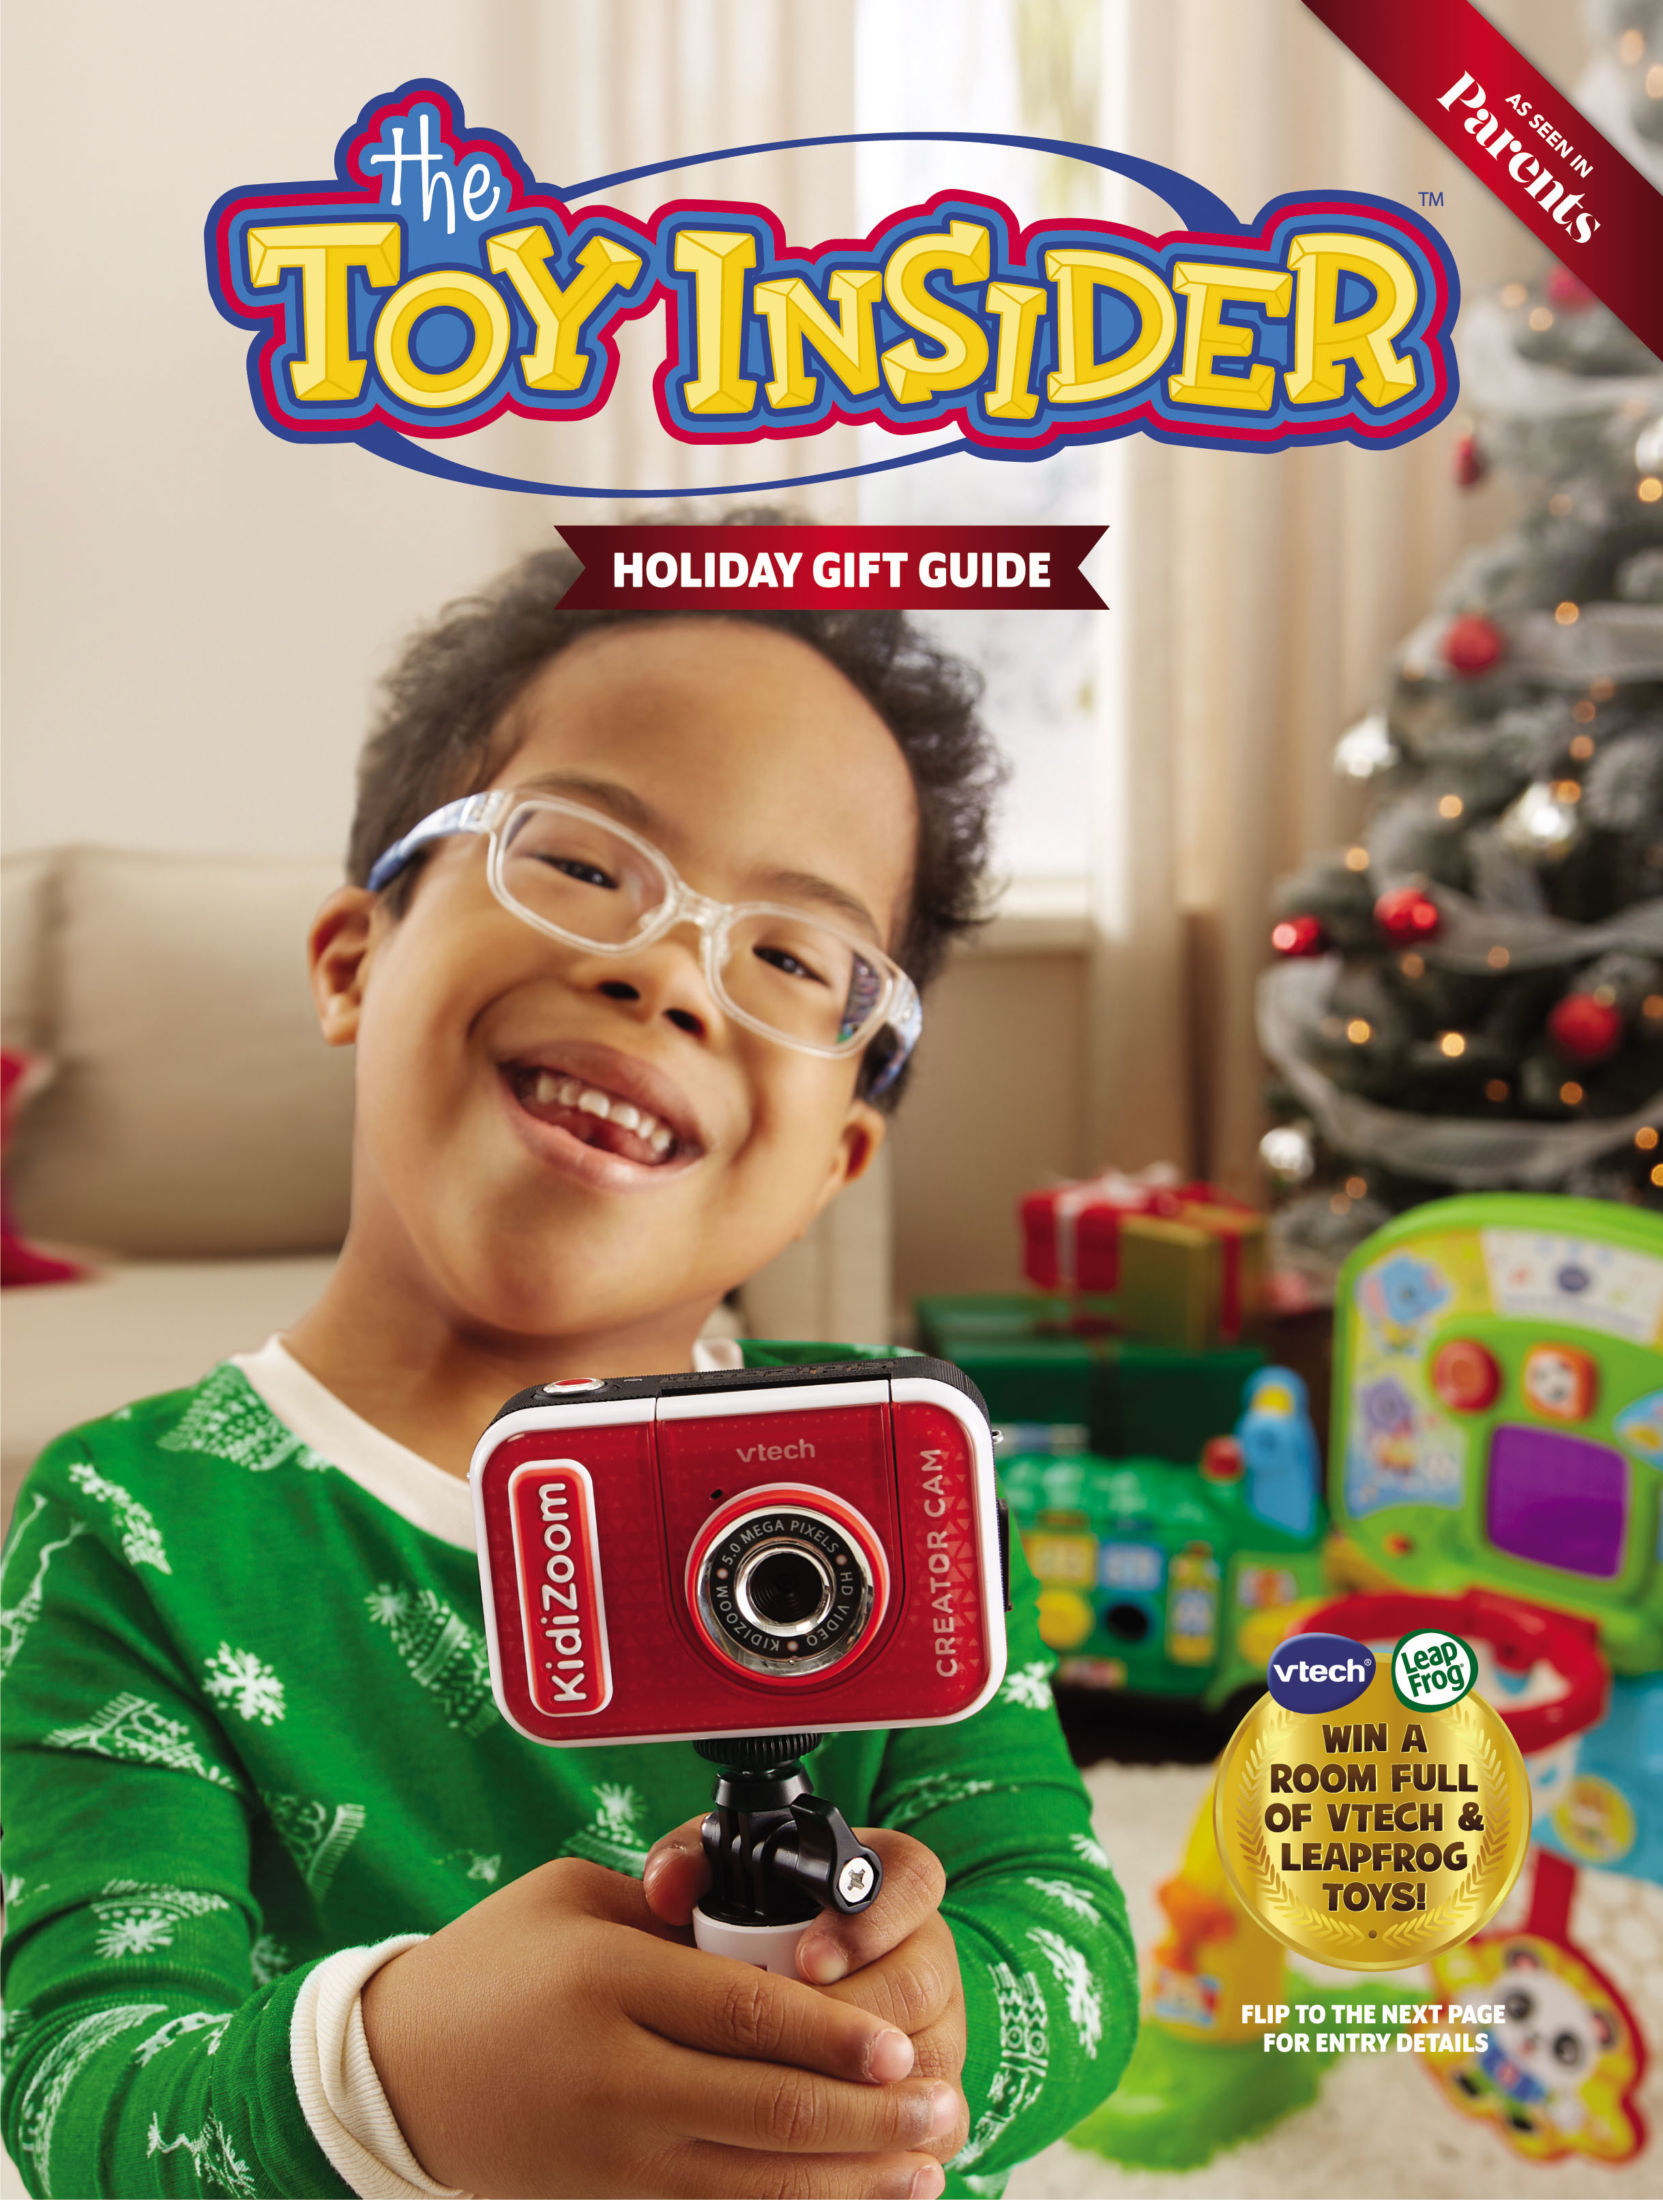 The Toy Book • The Leading Trade Publication for the Toy Industry